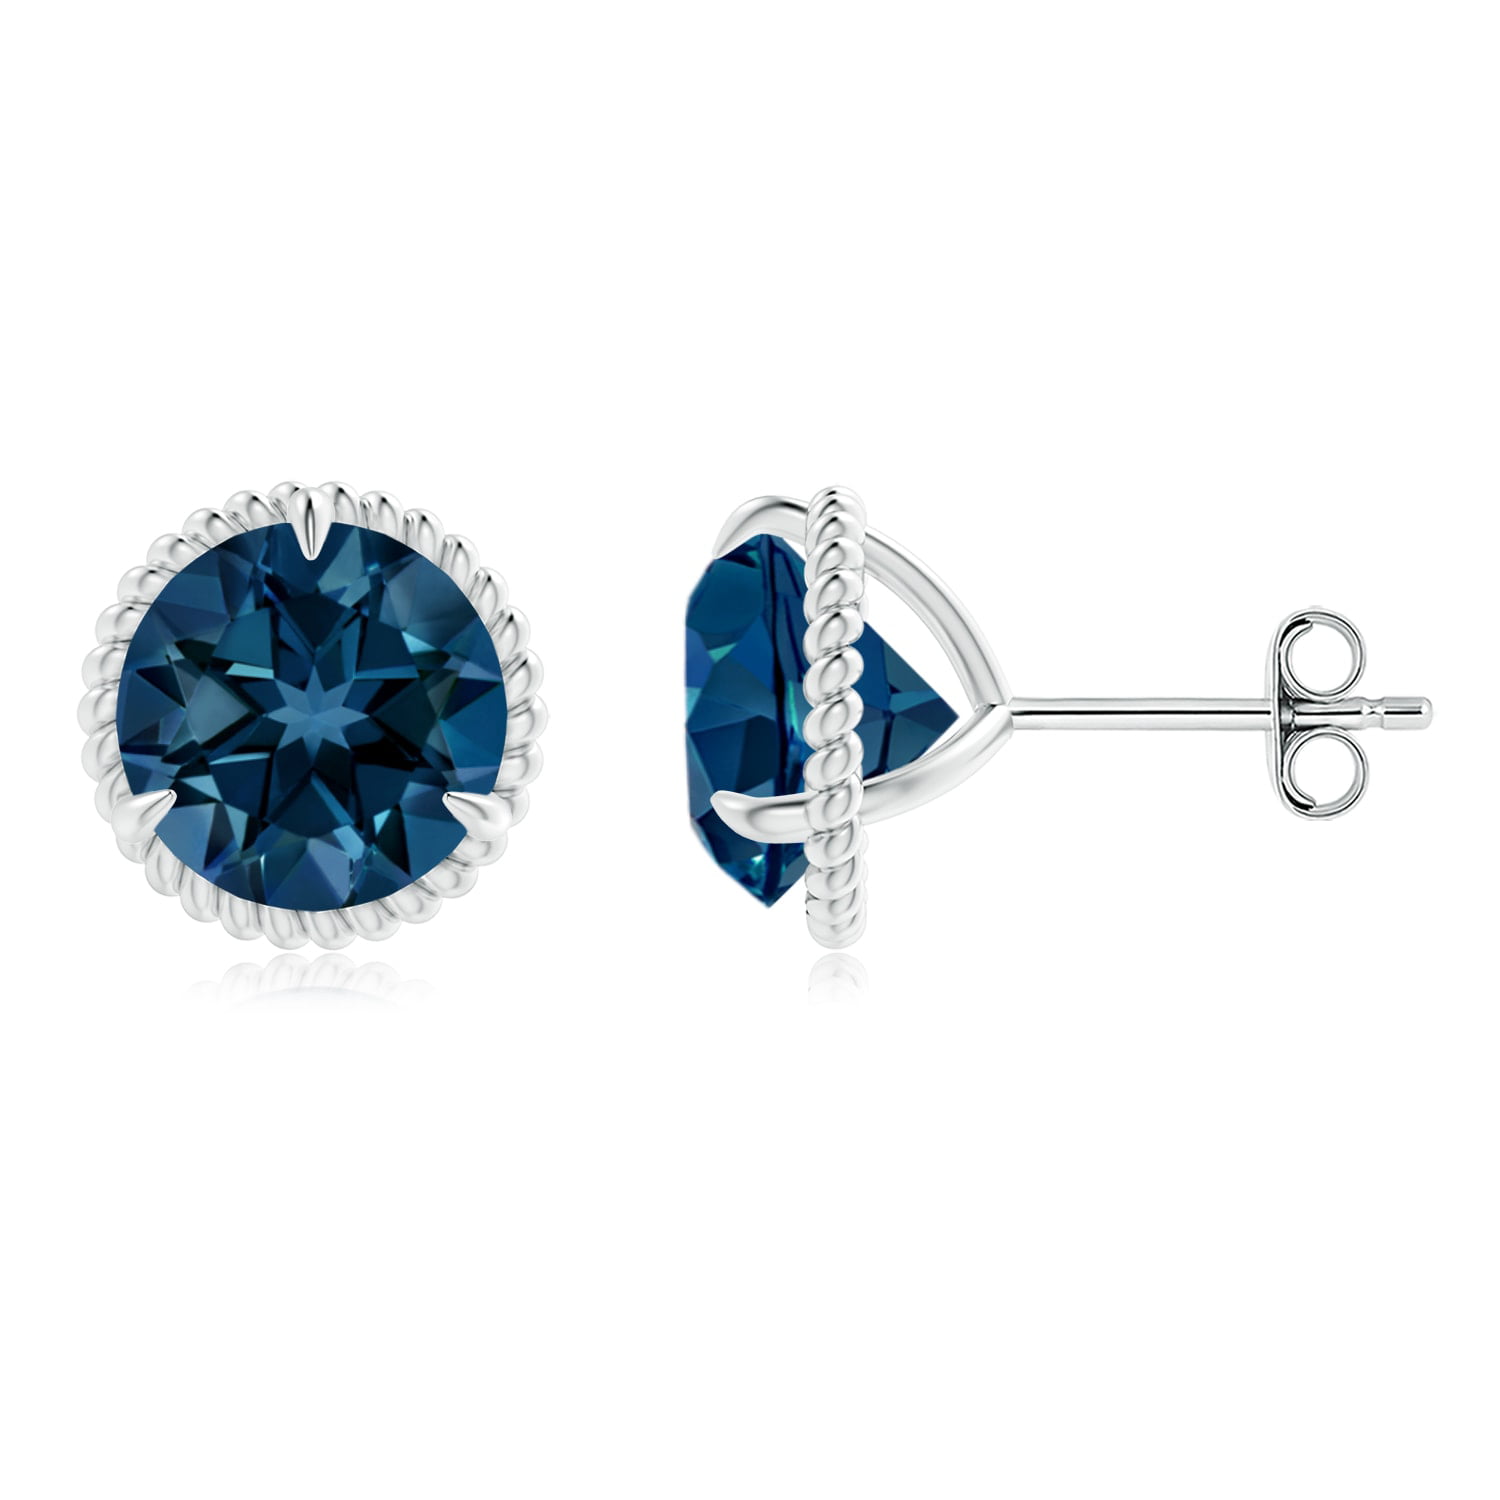 Details about   10k White Gold Oval Blue Topaz And Diamond Earrings